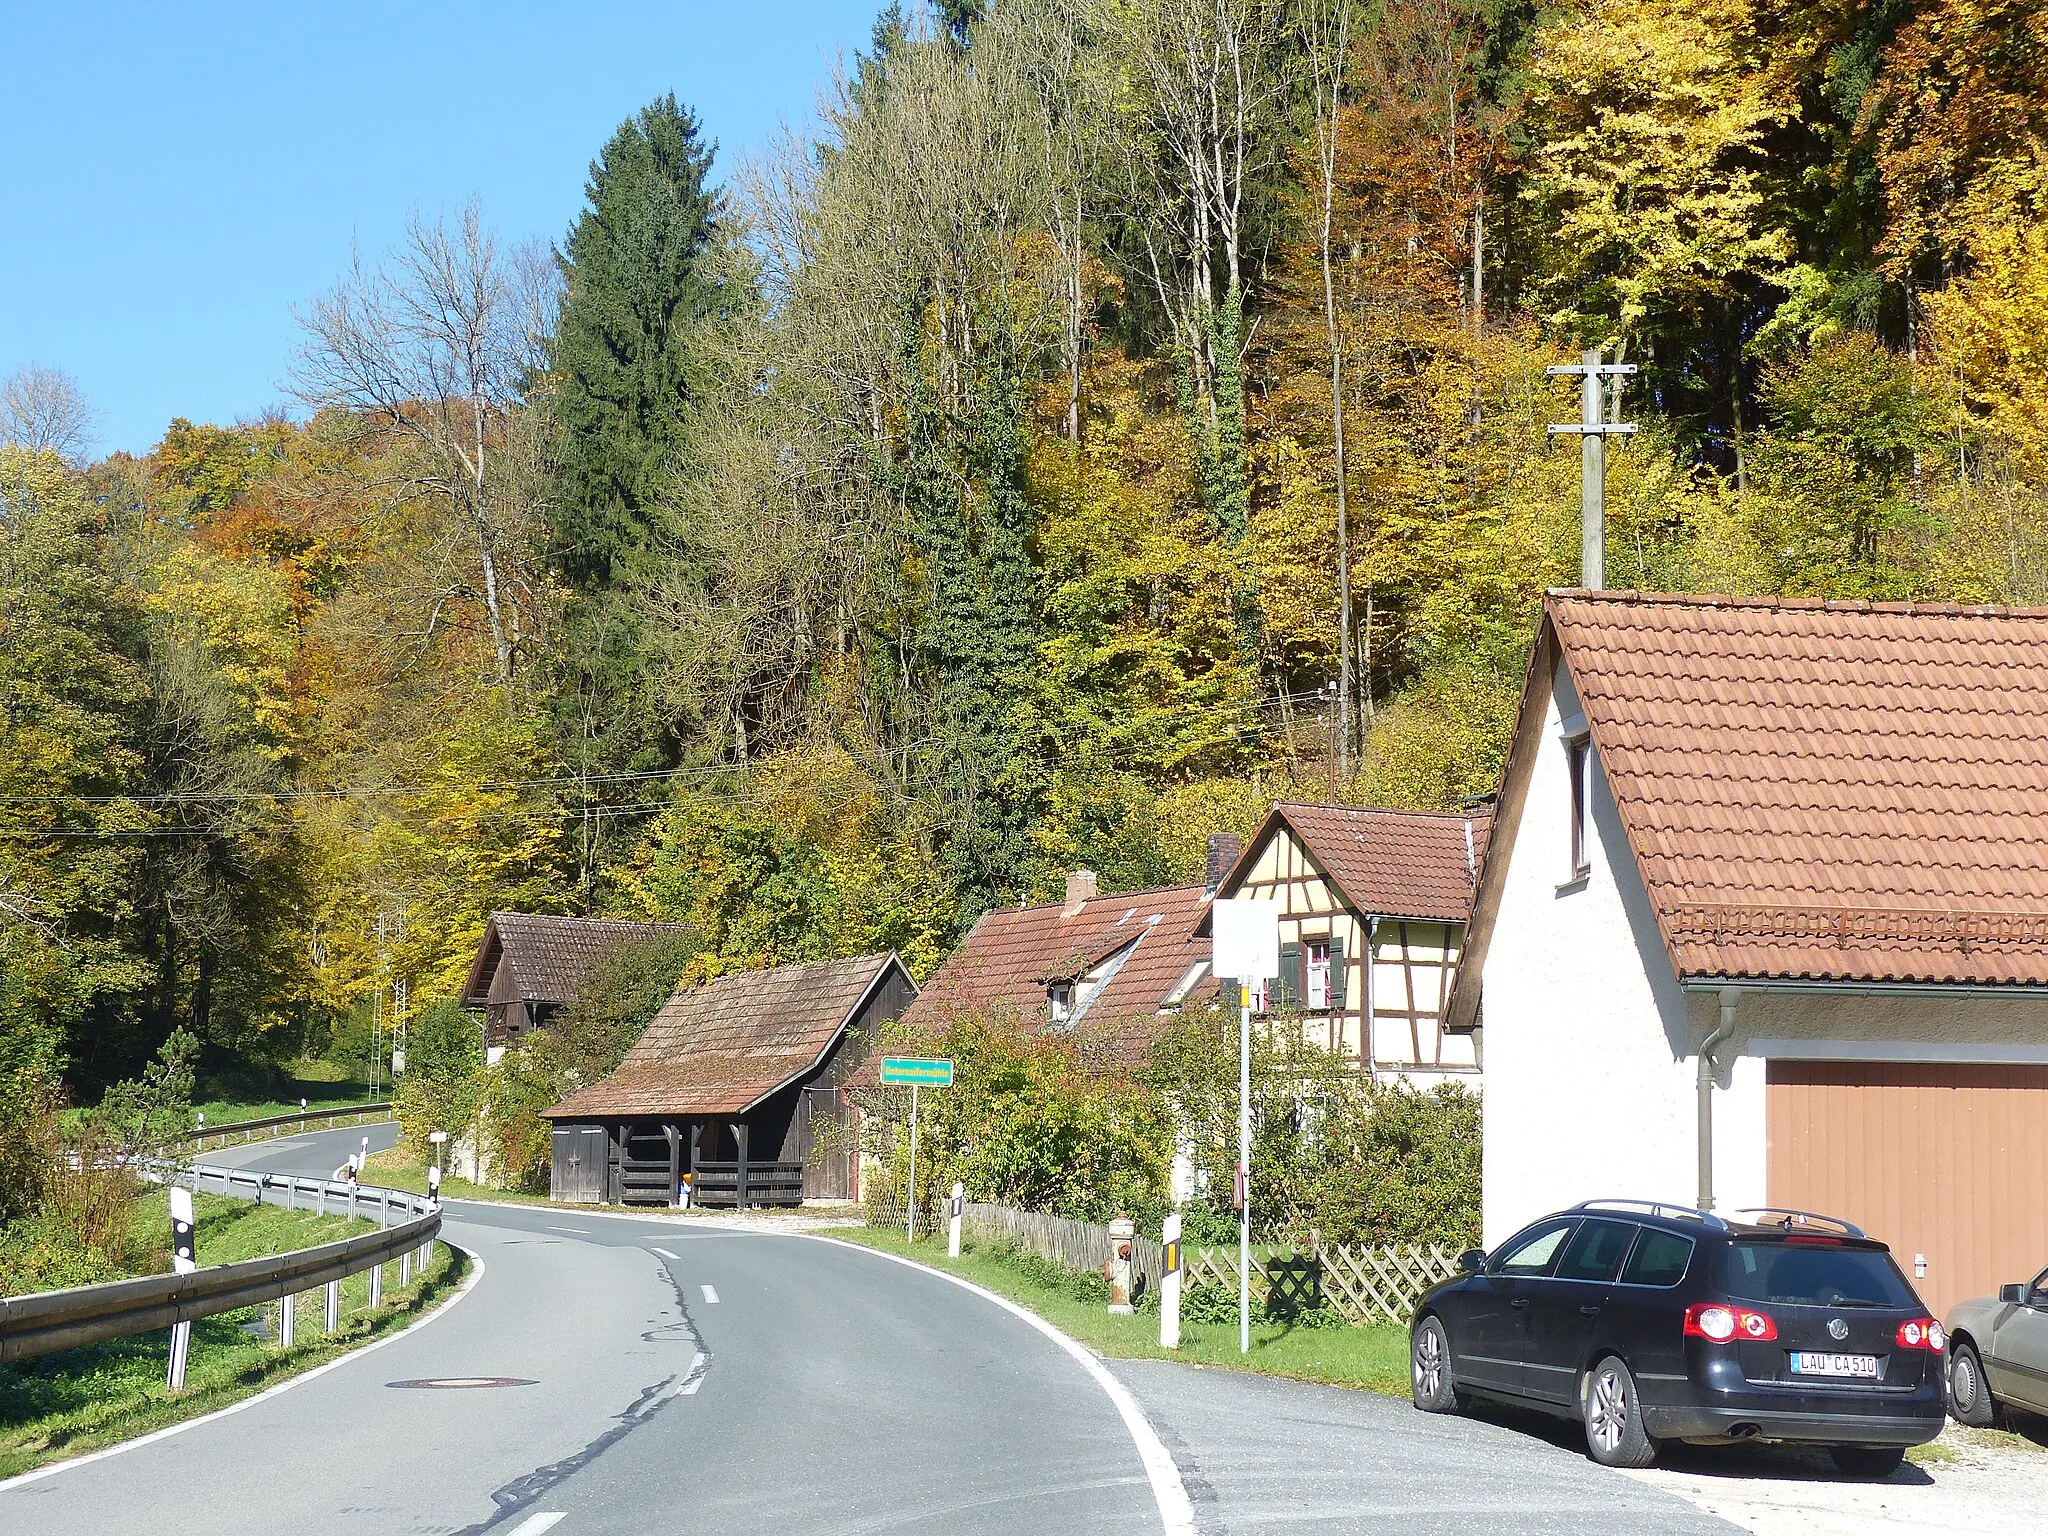 Photo showing: The hamlet Unternaifermühle, part of the municipality of Simmelsdorf